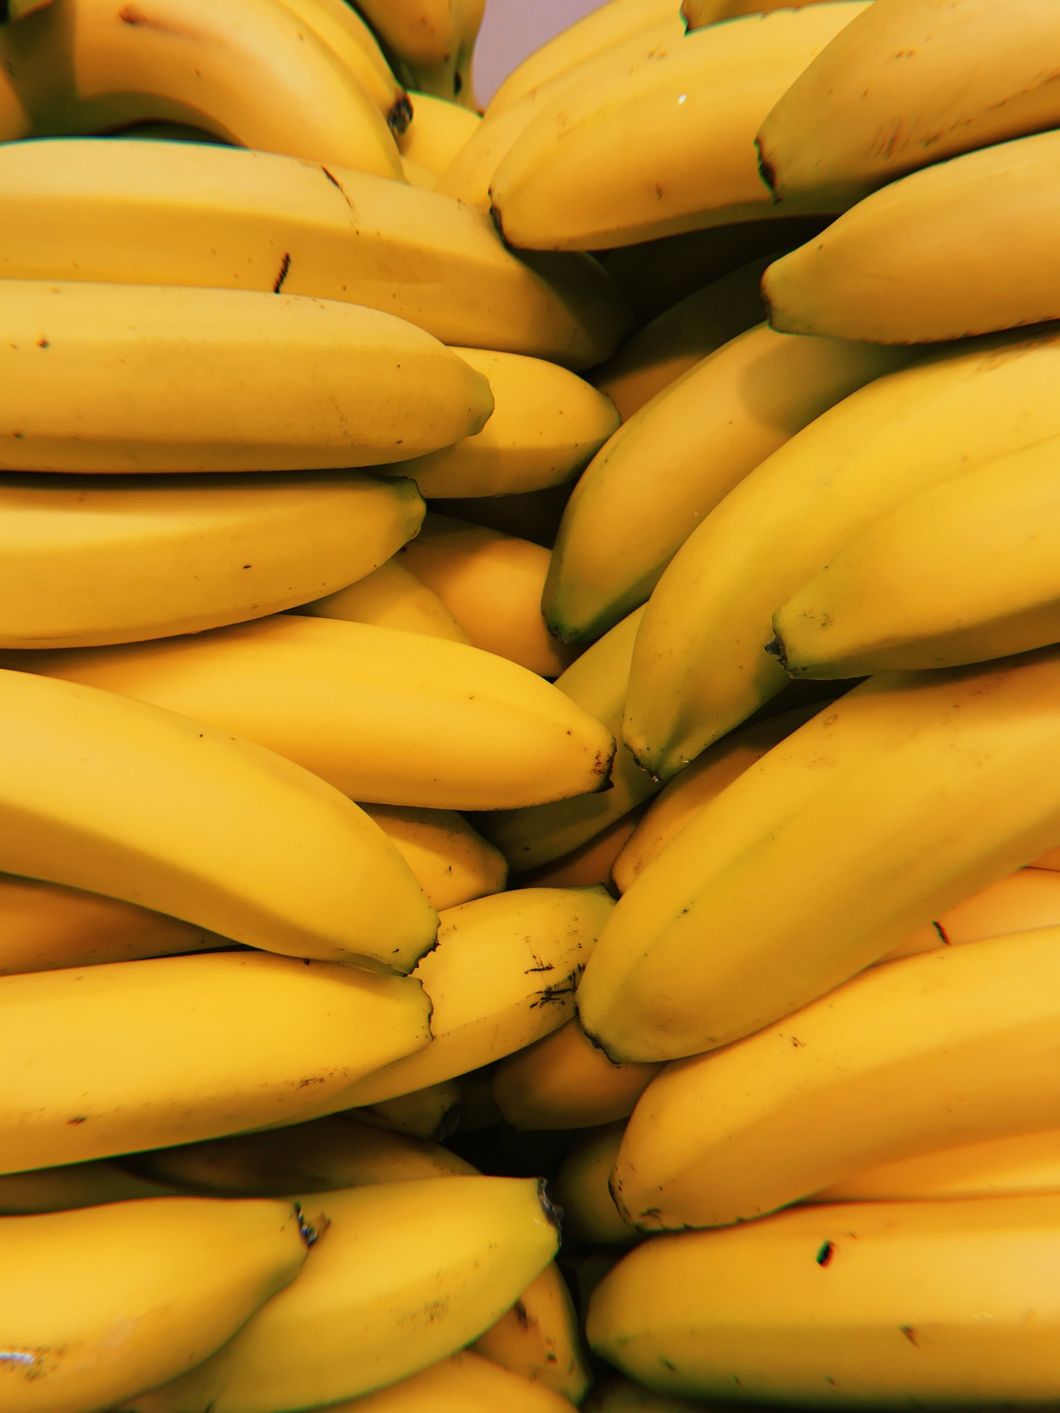 Bananas Are Headed For Extinction